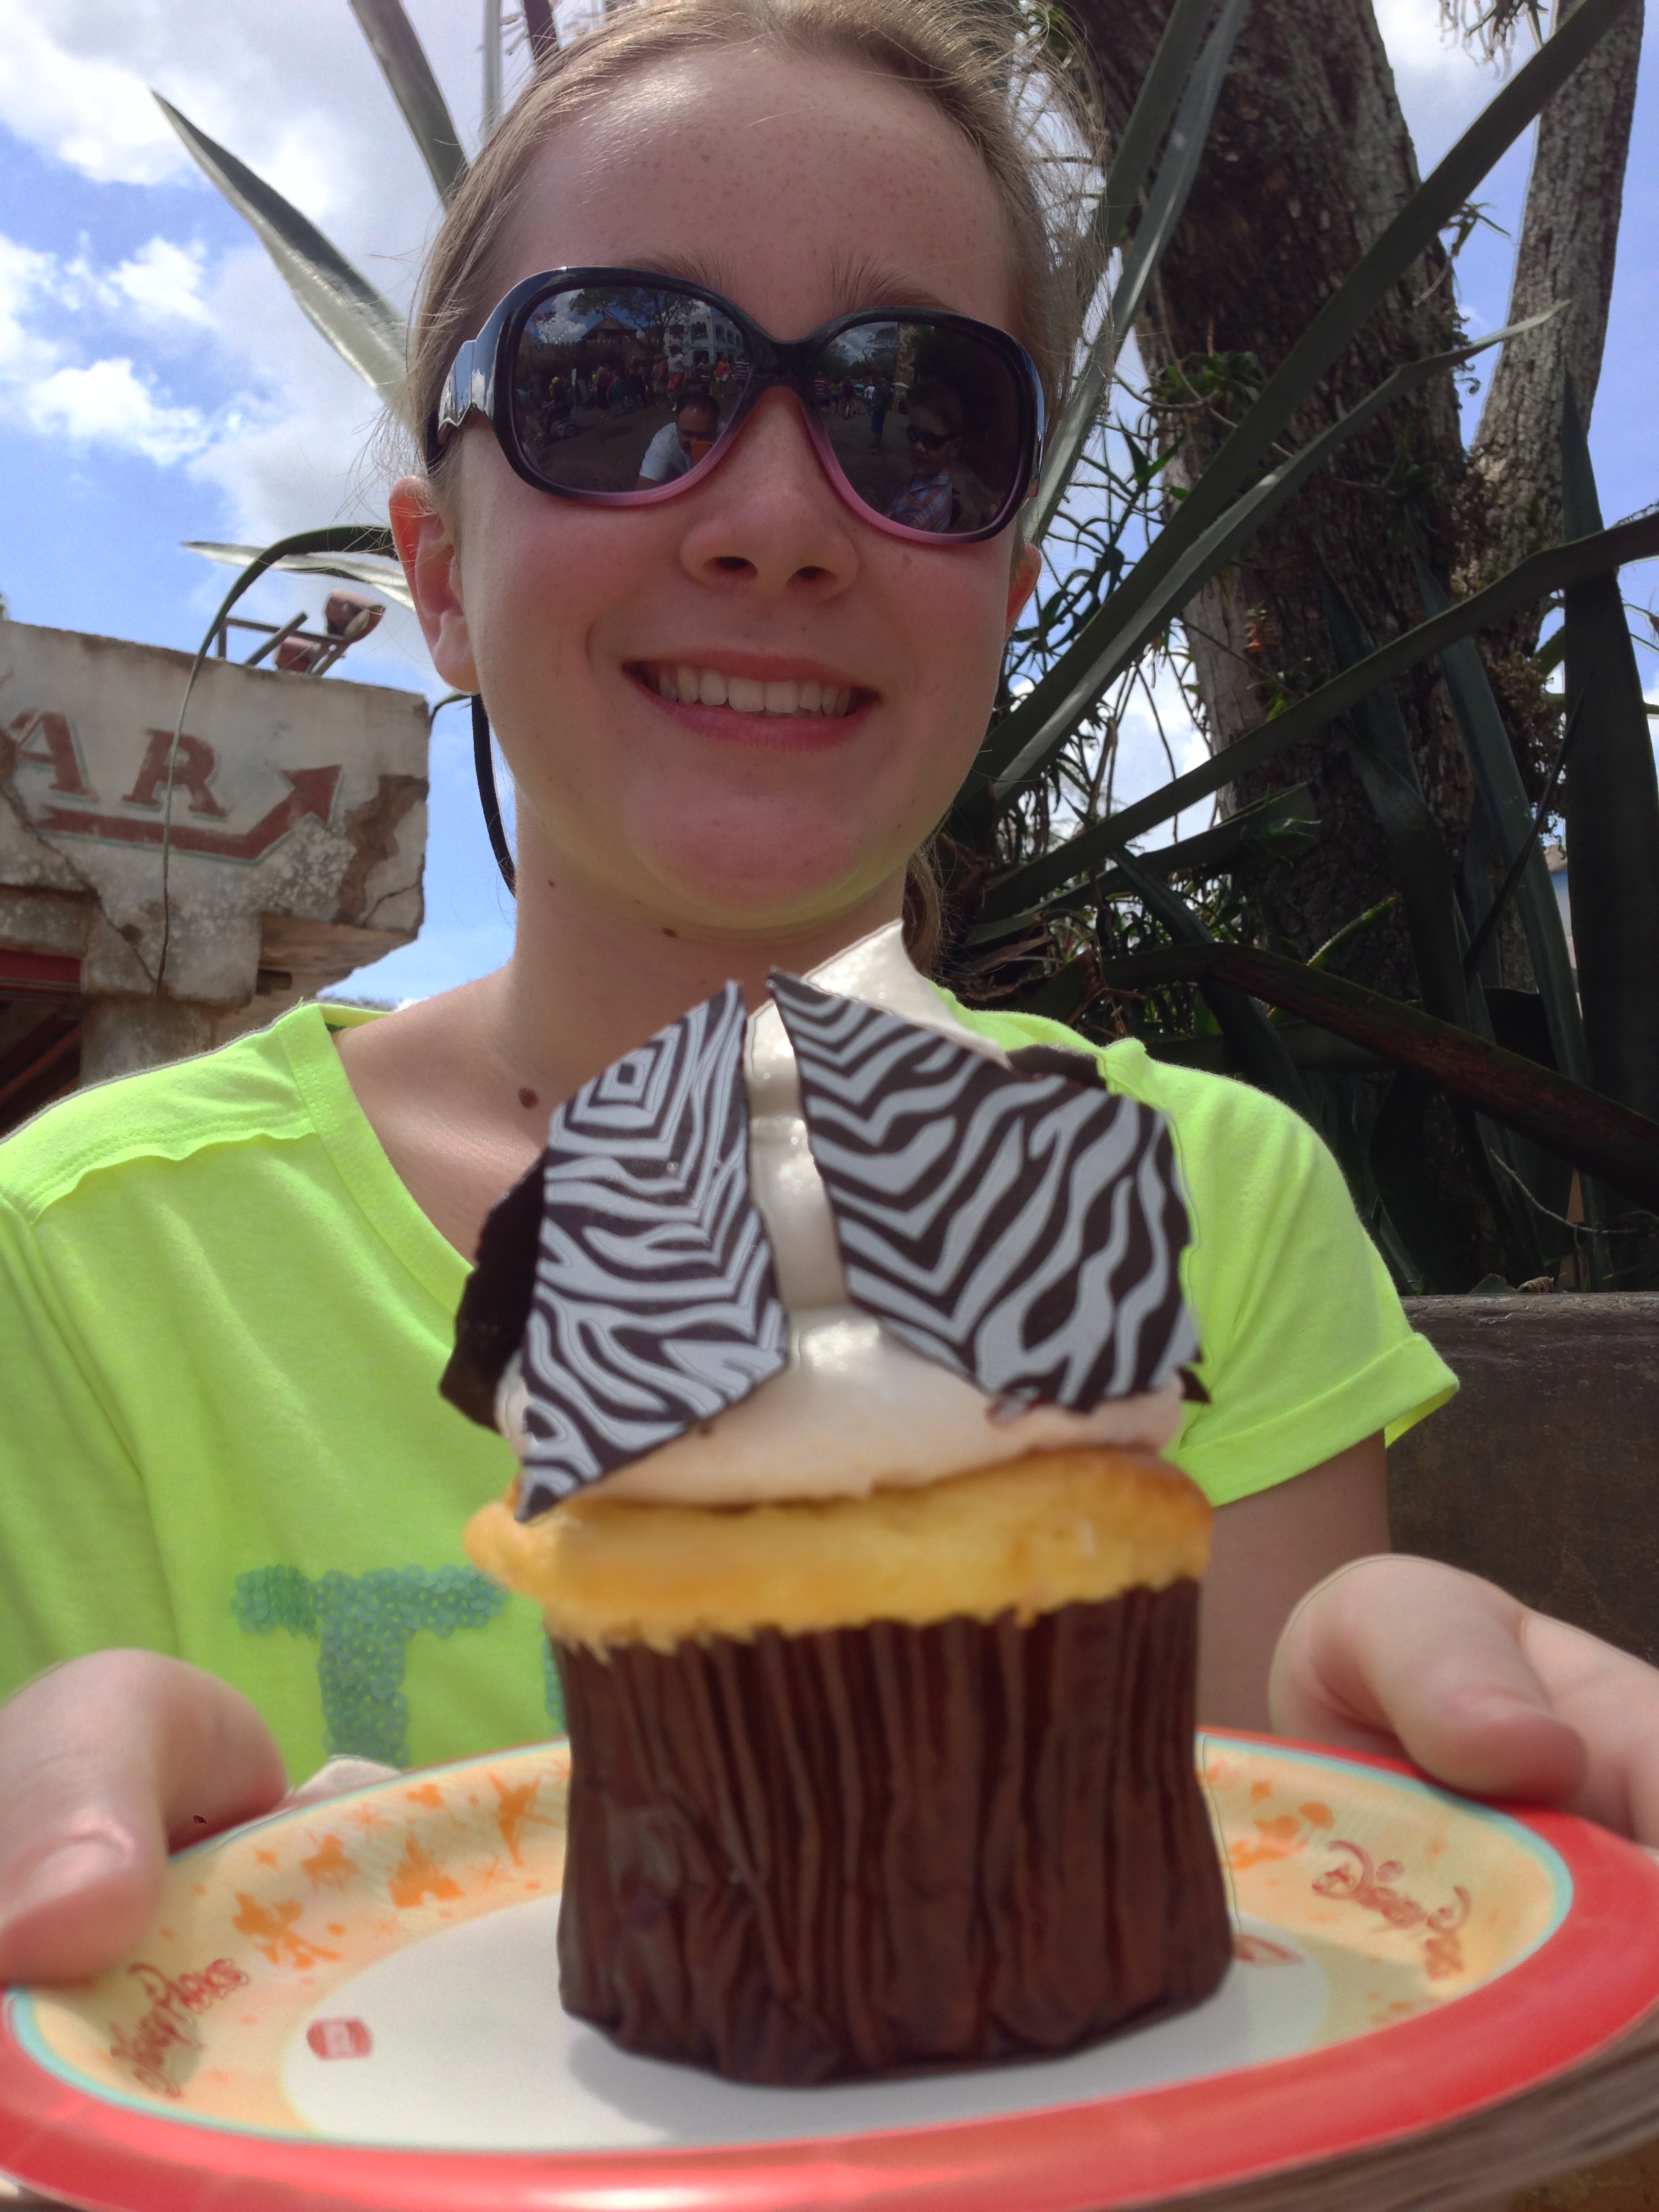 Wheres my water? Who cares, I have an Zebra cupcake!